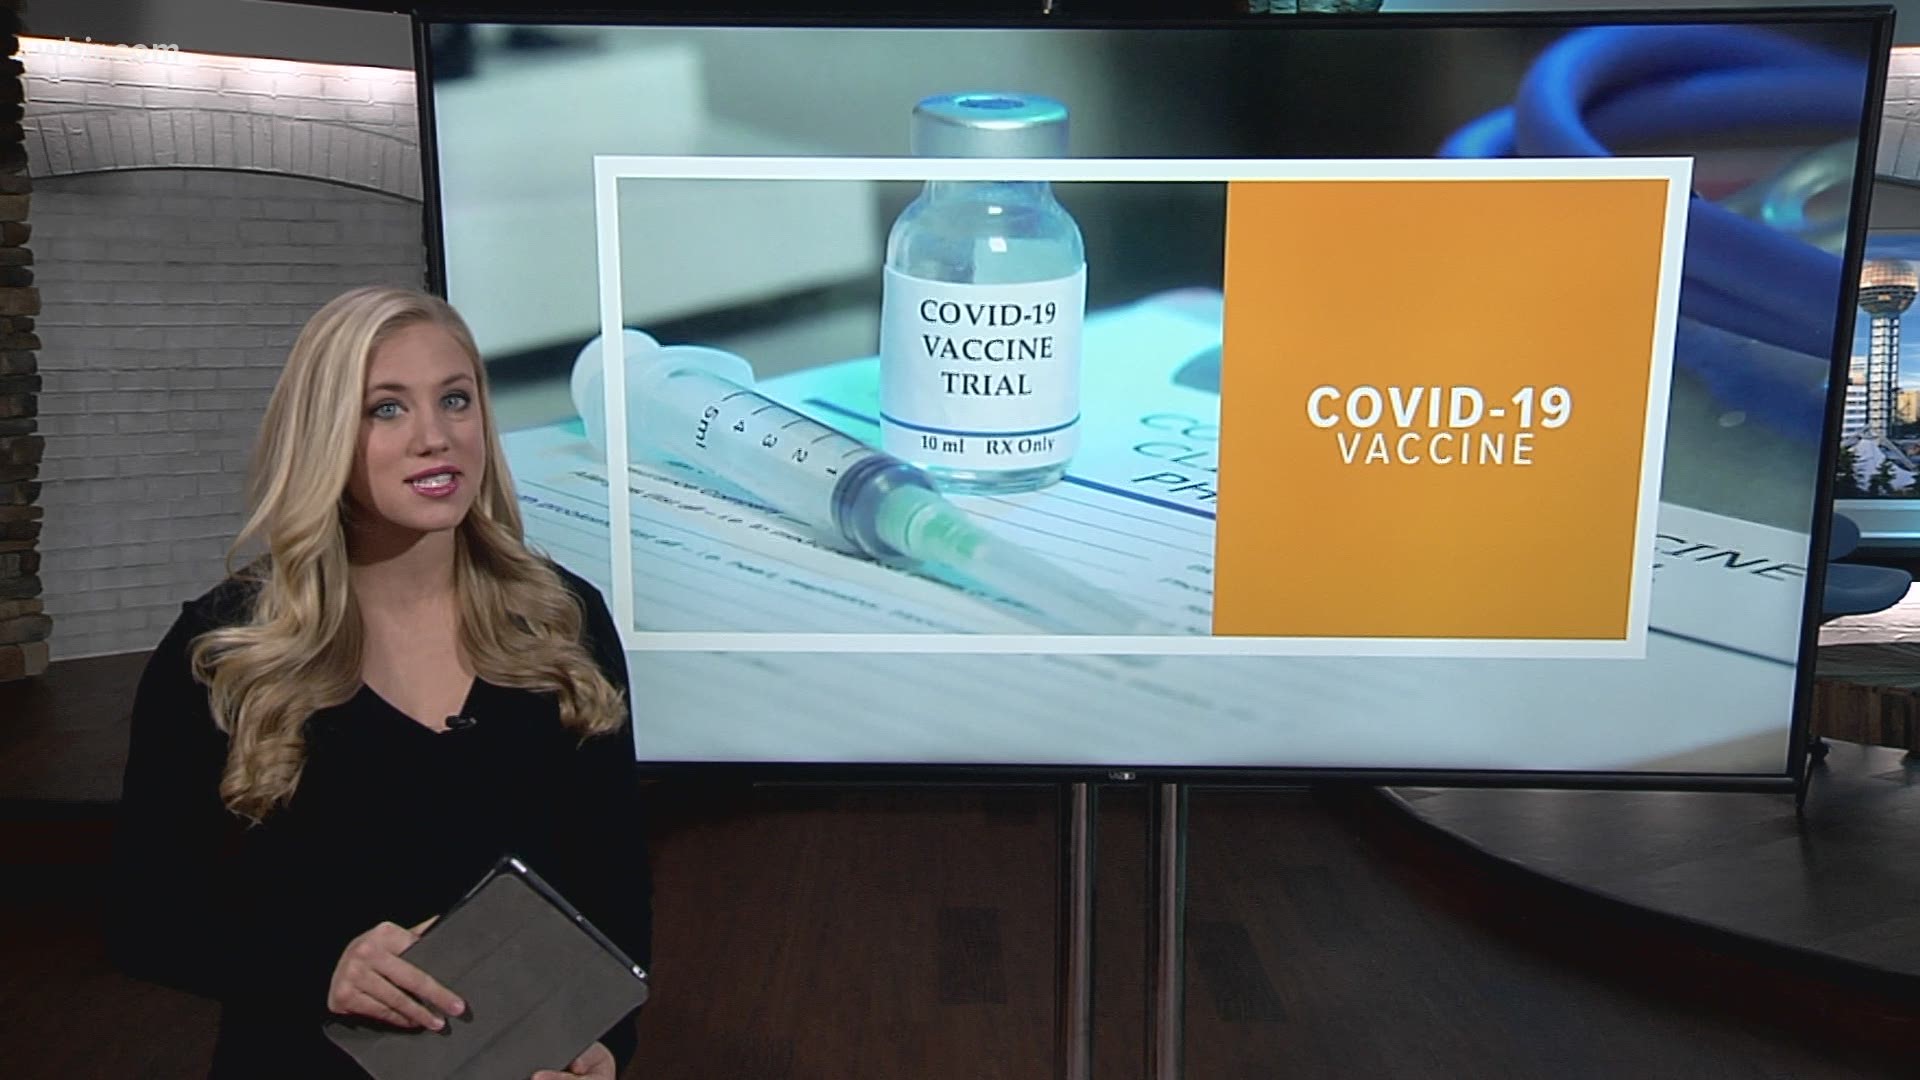 Despite the COVID-19 surge in Tennessee, a local researcher says he's hopeful effective vaccines will be available soon.